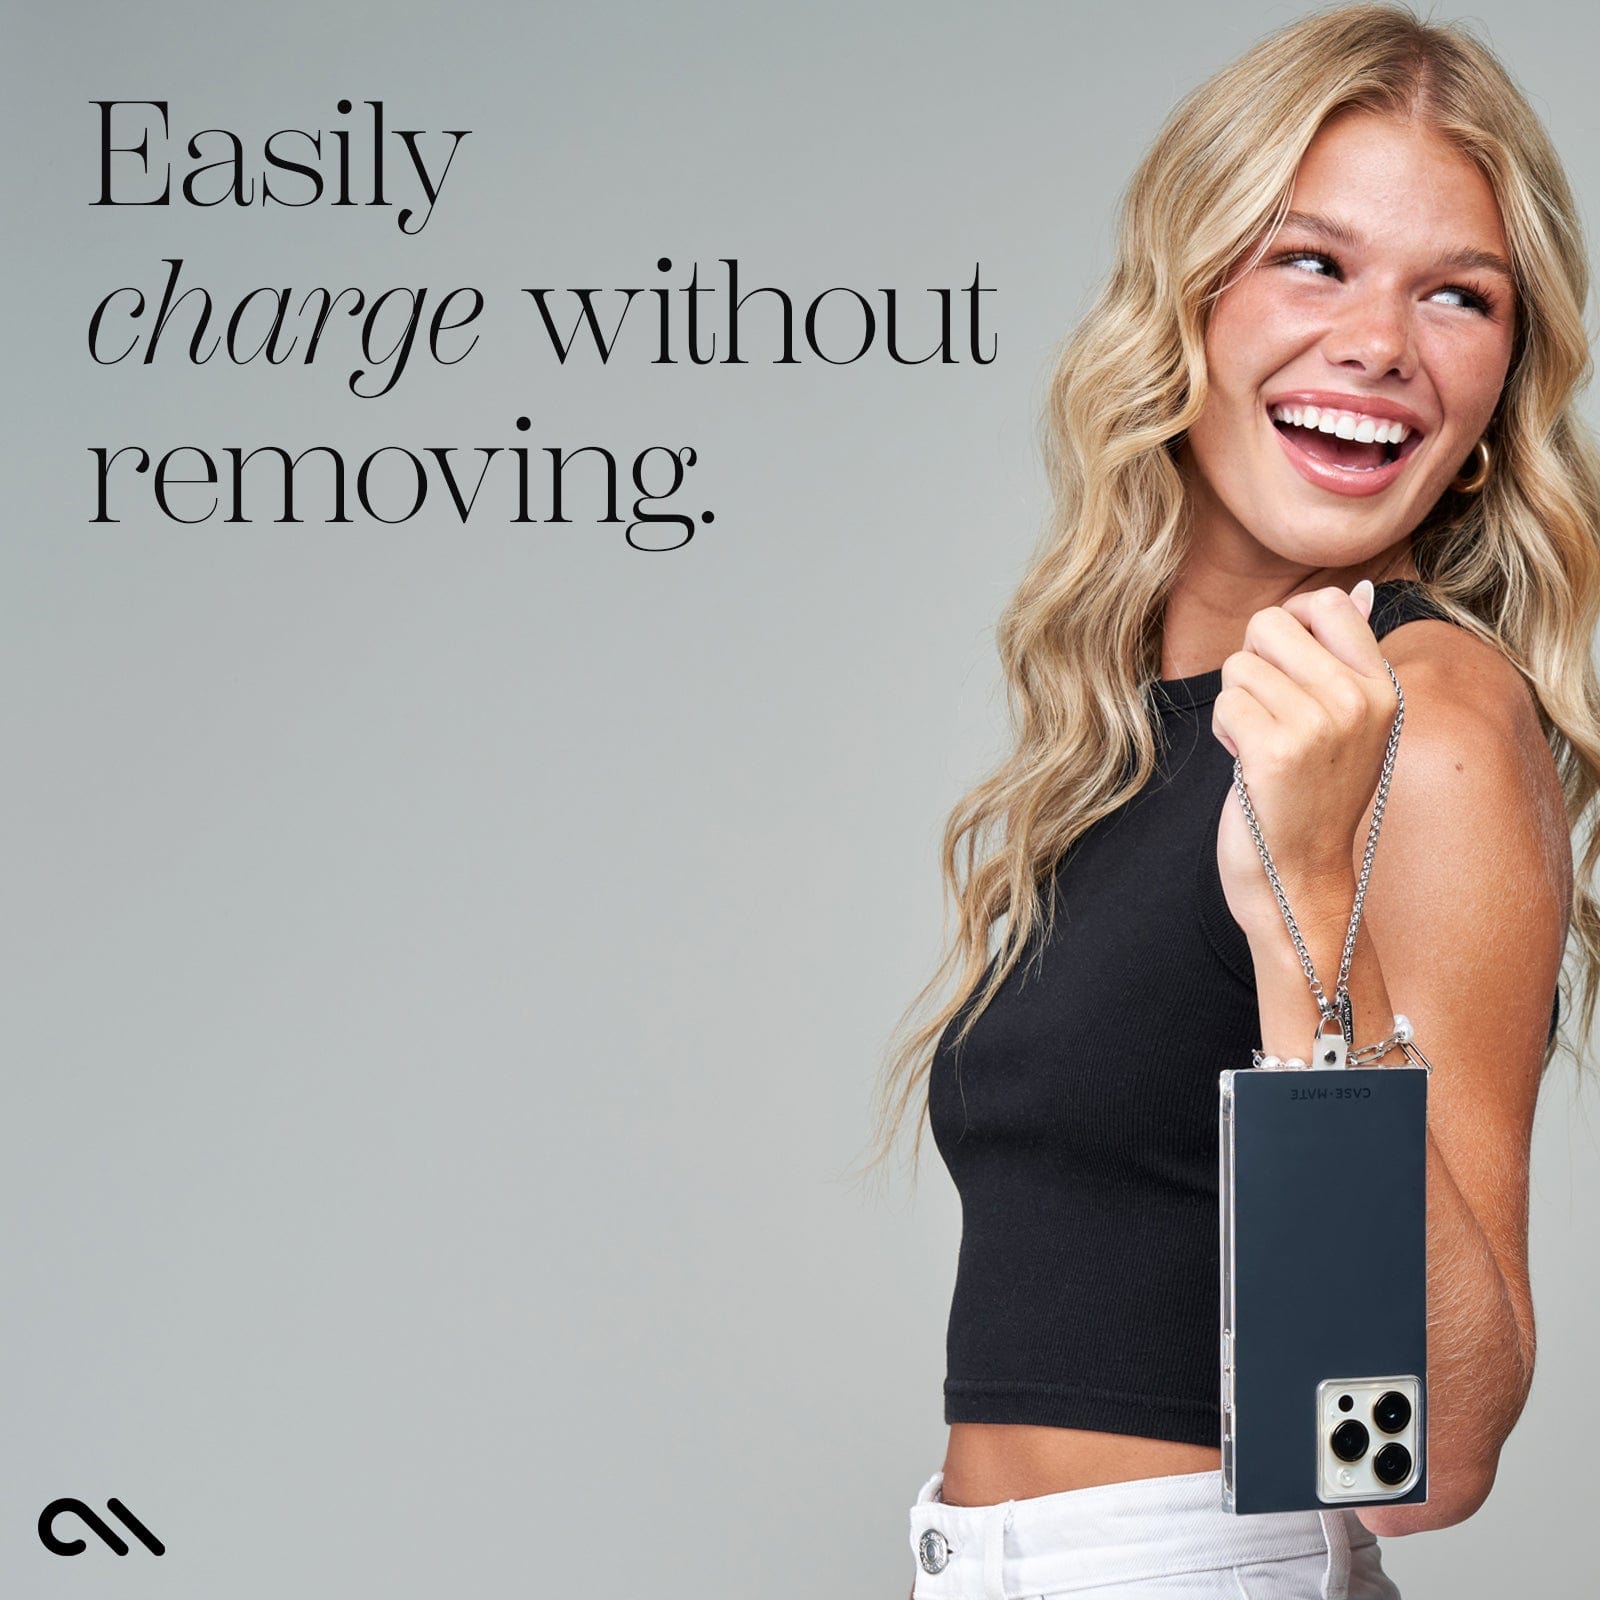 EASILY CHARGE WITHOUT REMOVING